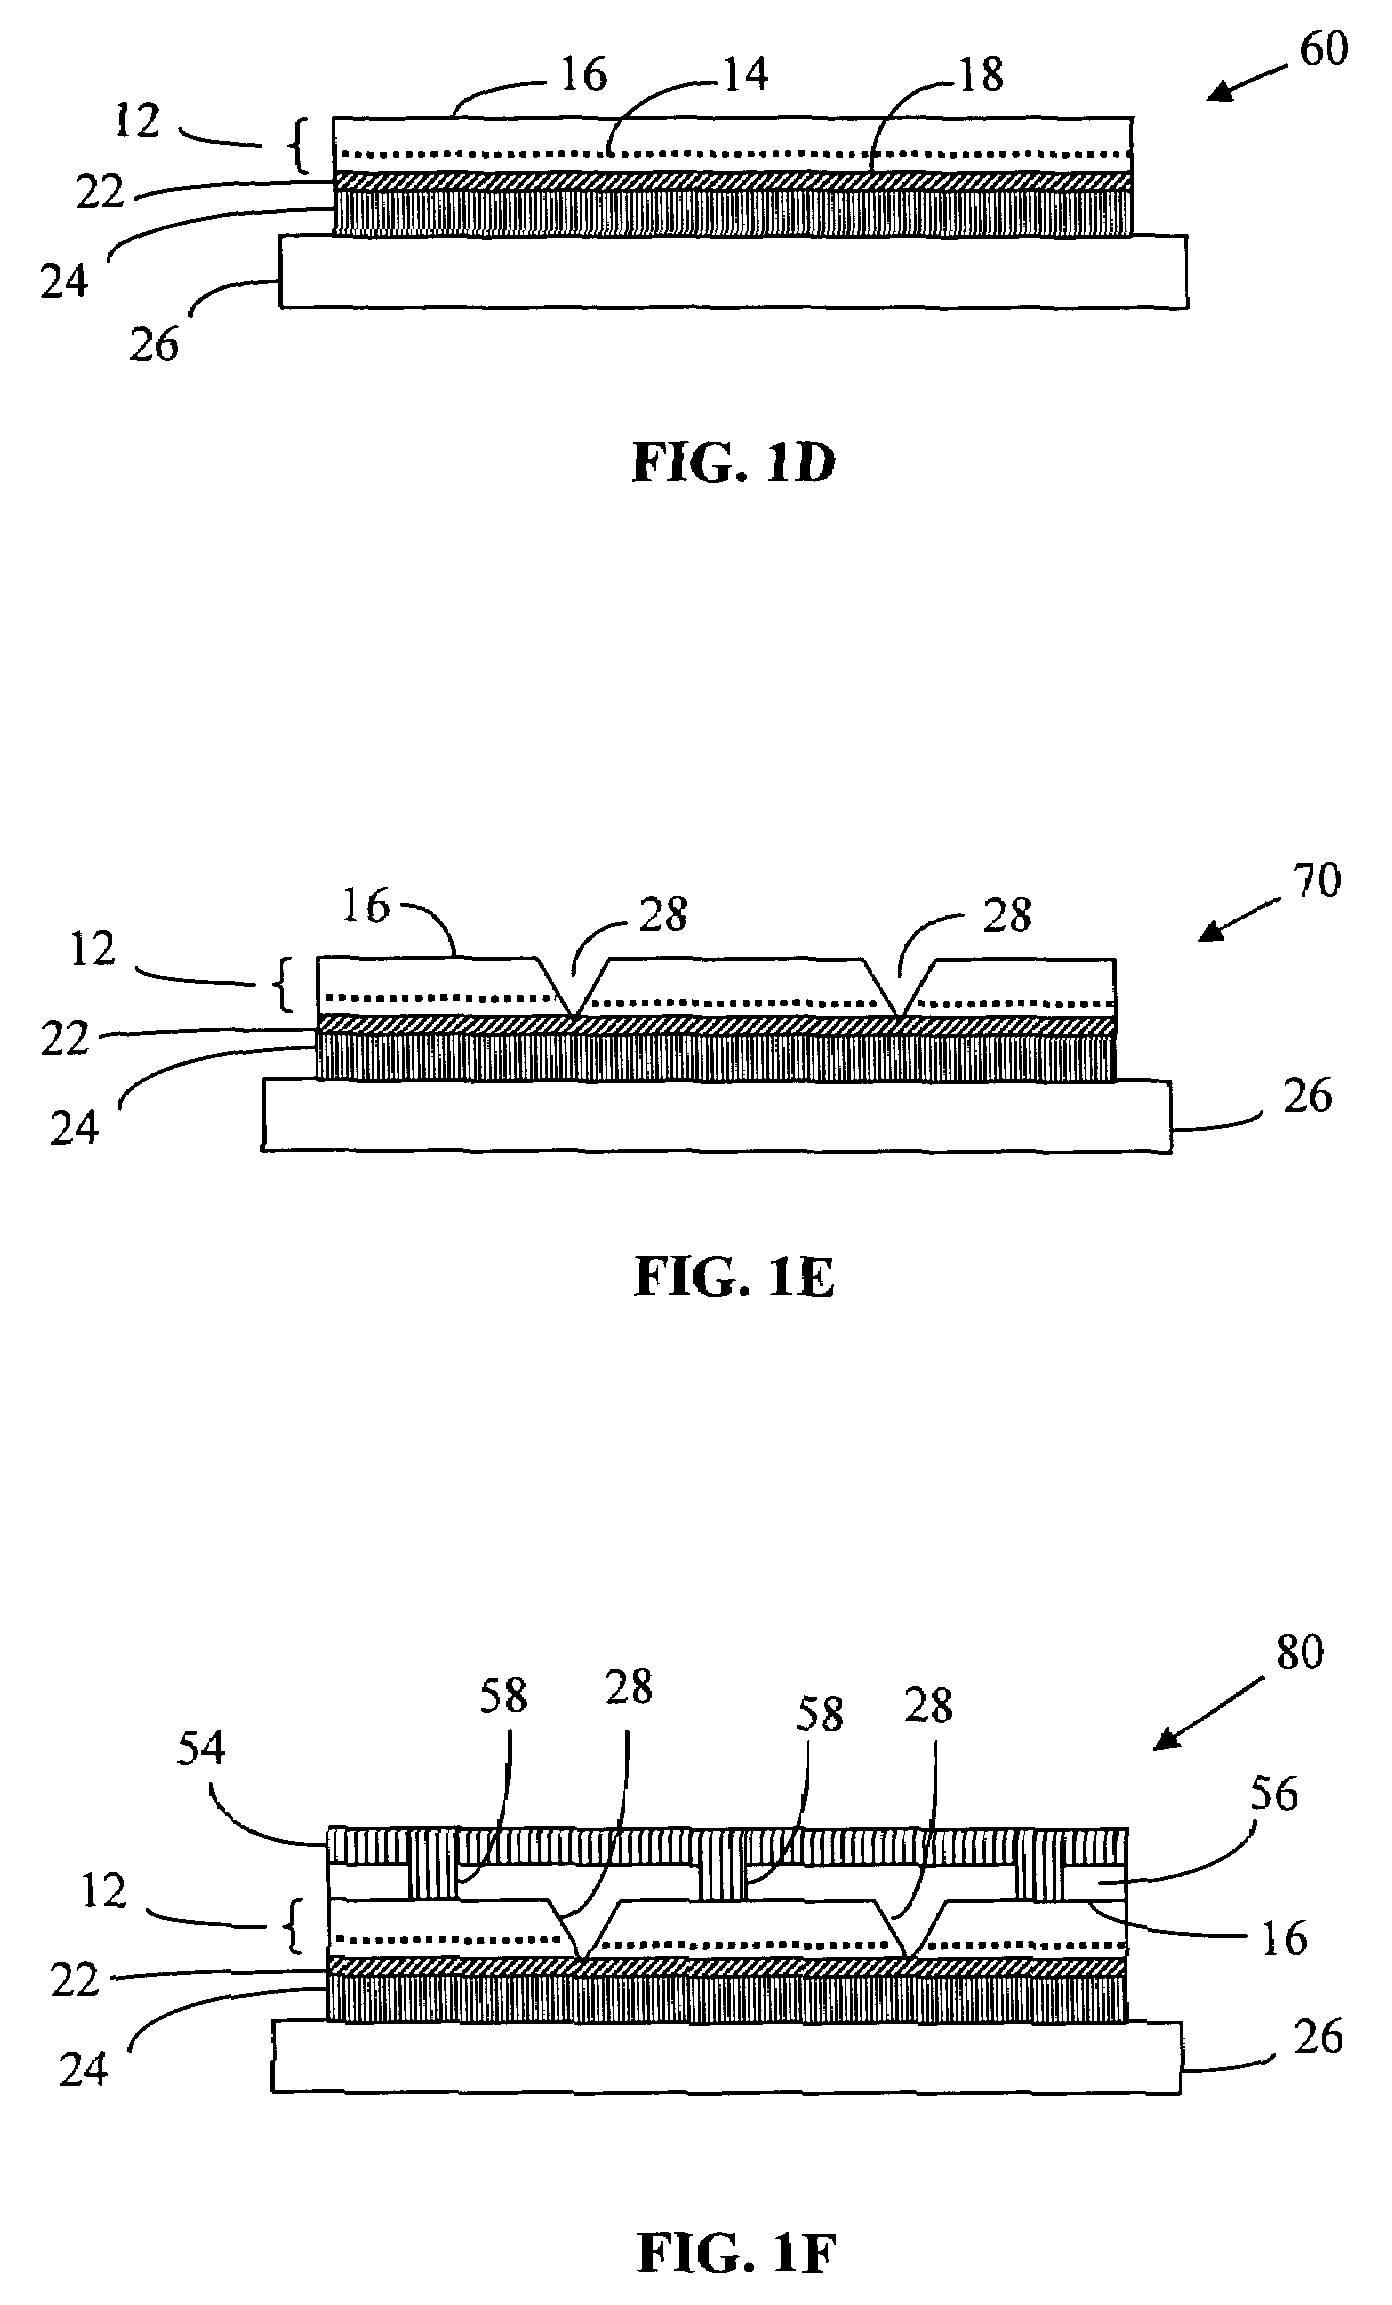 Light emitting diodes exhibiting both high reflectivity and high light extraction